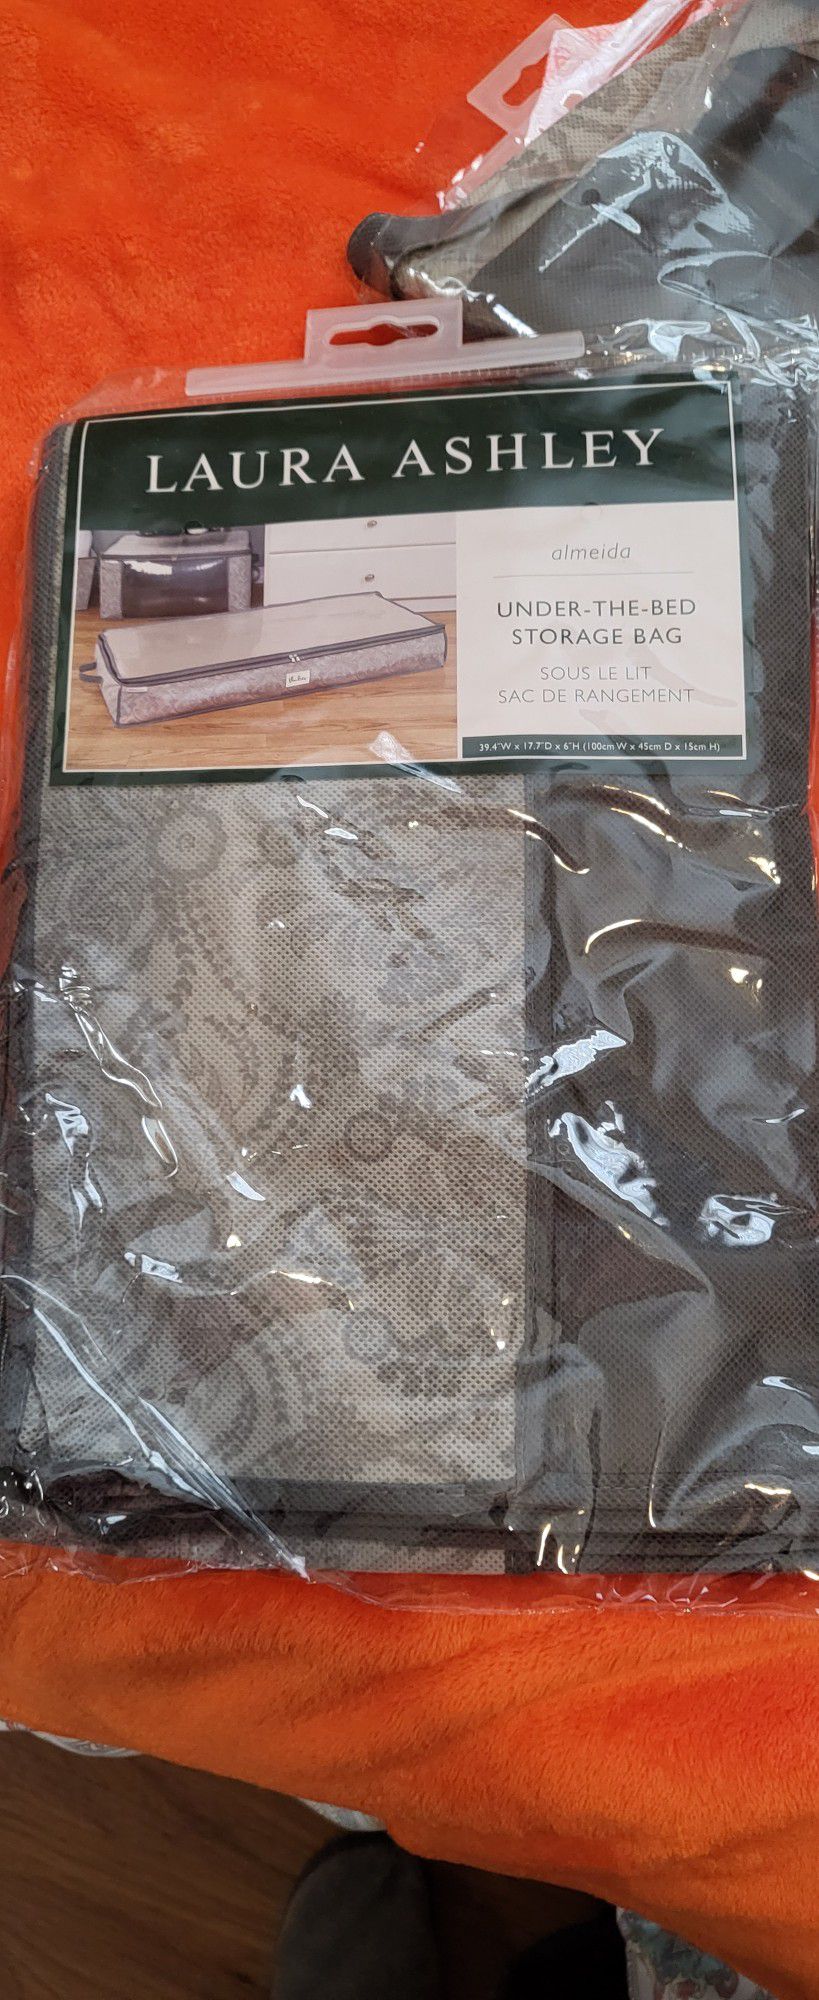 2 LAURA ASHLEY UNDER-THE-BED STORAGE BAGS $10 OBO